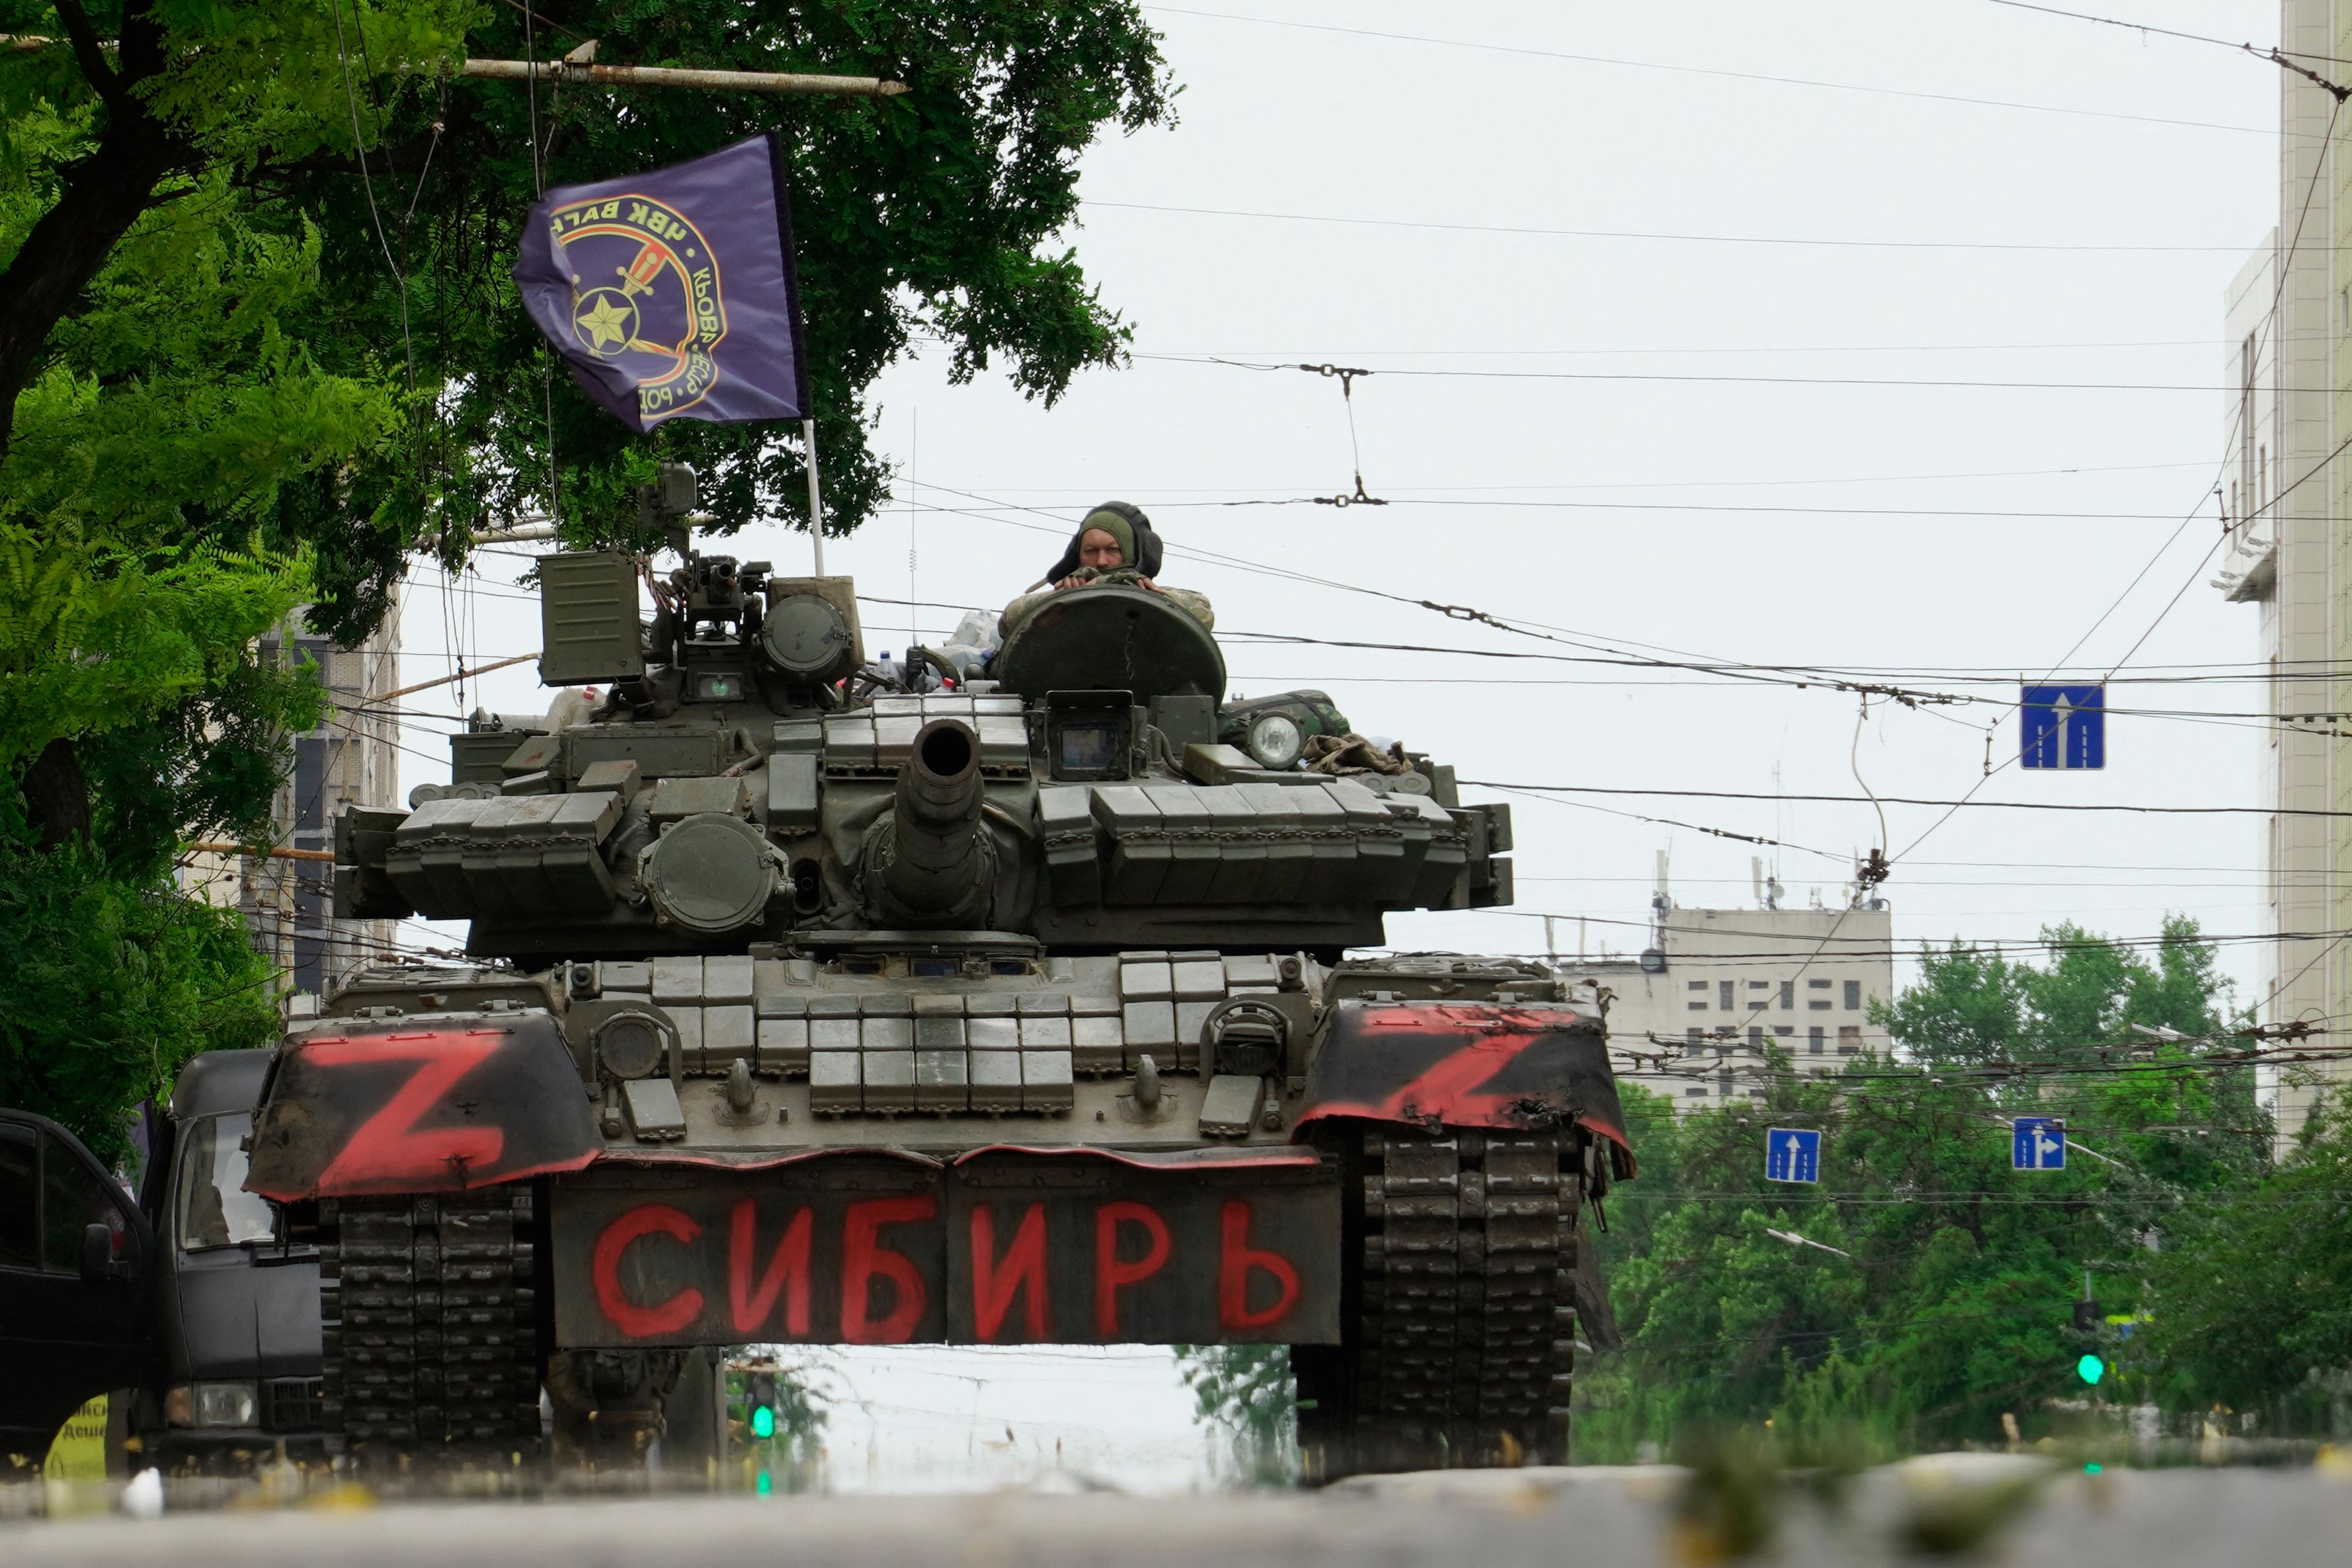 Members of Wagner group sit atop of a tank in a street in the city of Rostov-on-Don, on June 24, 2023